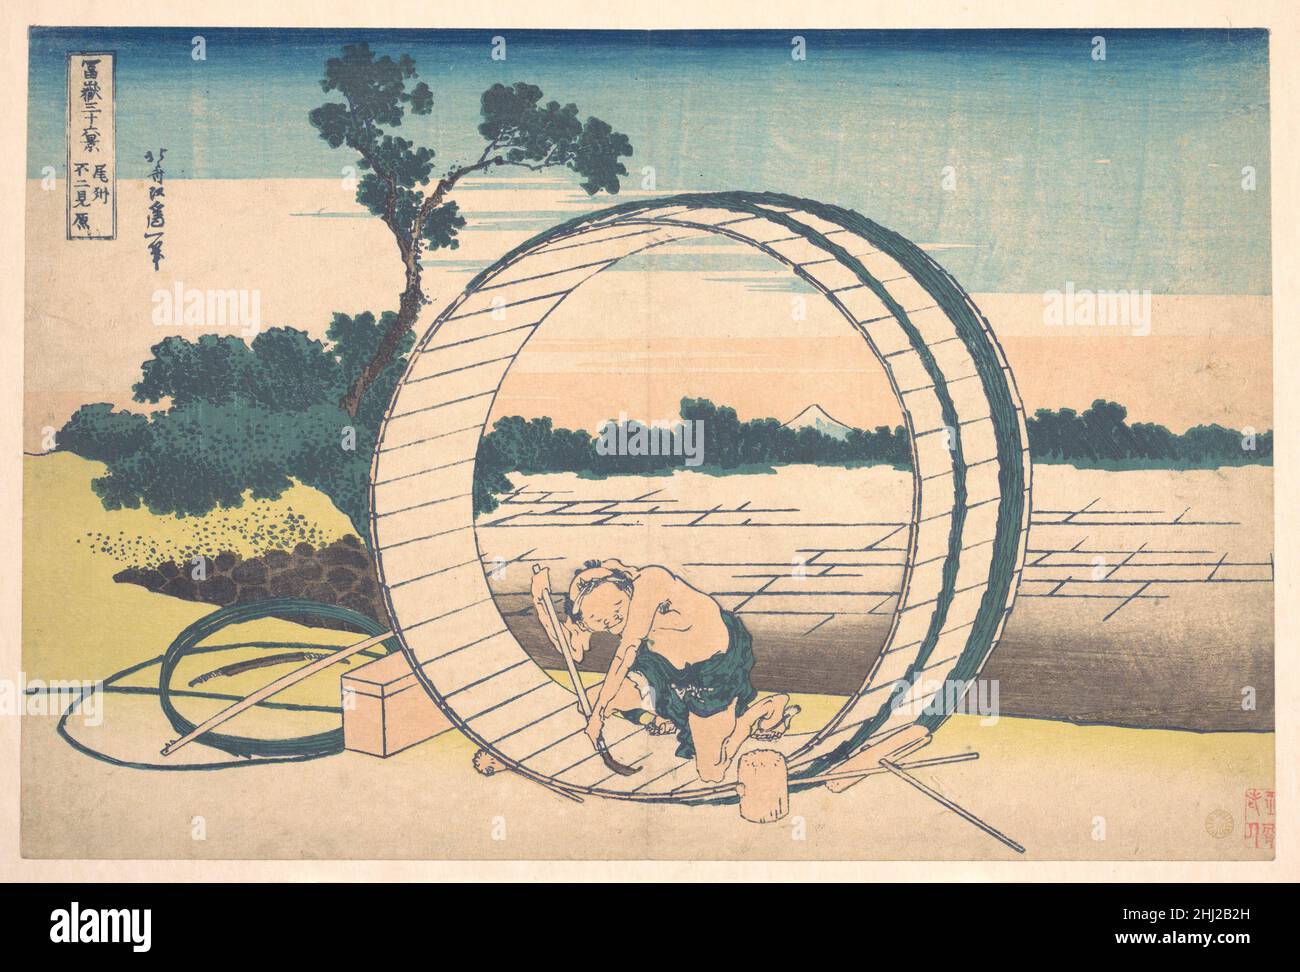 Fujimigahara in Owari Province (Bishū Fujimigahara), from the series Thirty-six Views of Mount Fuji (Fugaku sanjūrokkei) ca. 1830–32 Katsushika Hokusai Japanese By framing Fuji and the cooper in the interior of the large barrel, Hokusai effects an intimate dialogue between the iconic mountain and the sinewy man. The juxtaposition of Fuji and the cooper lends a religious overtone to the man's honest labor and existence.. Fujimigahara in Owari Province (Bishū Fujimigahara), from the series Thirty-six Views of Mount Fuji (Fugaku sanjūrokkei)  36500 Stock Photo